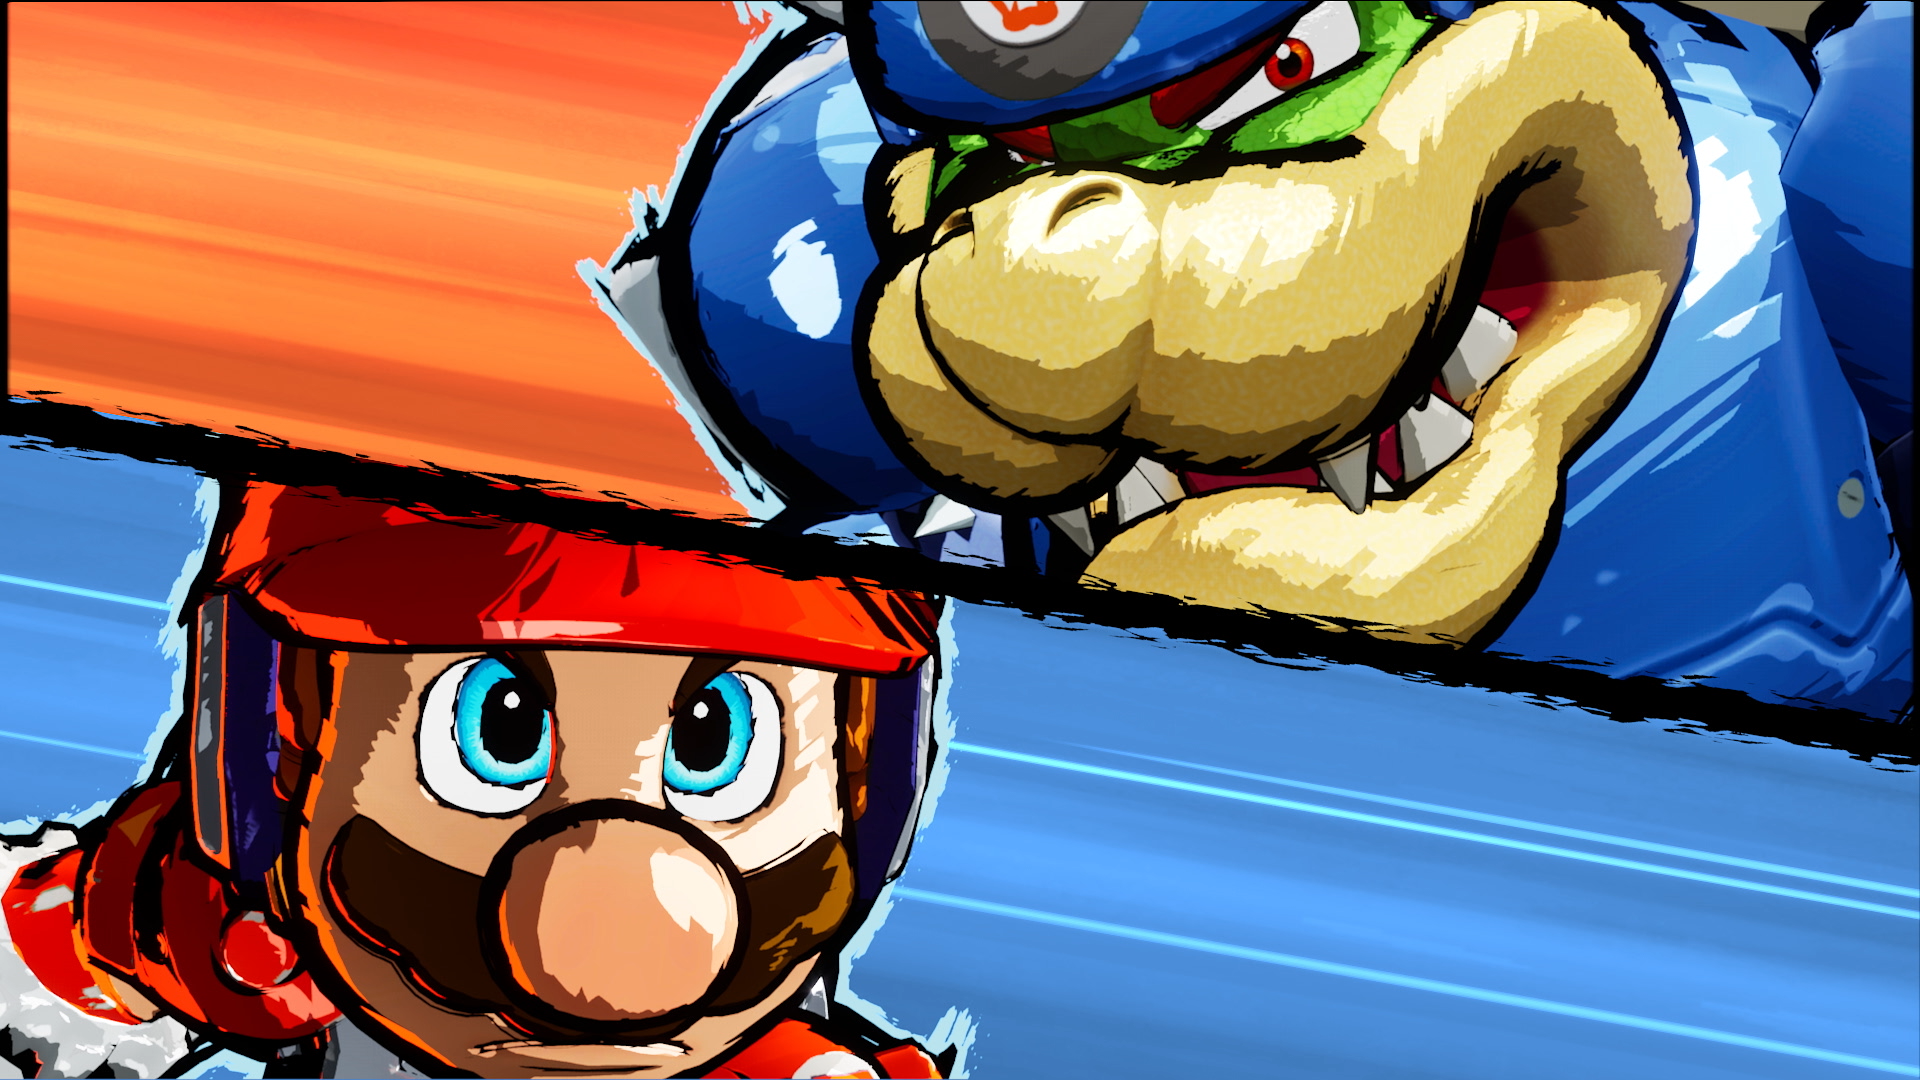 Illustration of two Nintendo characters in soccer gear facing off